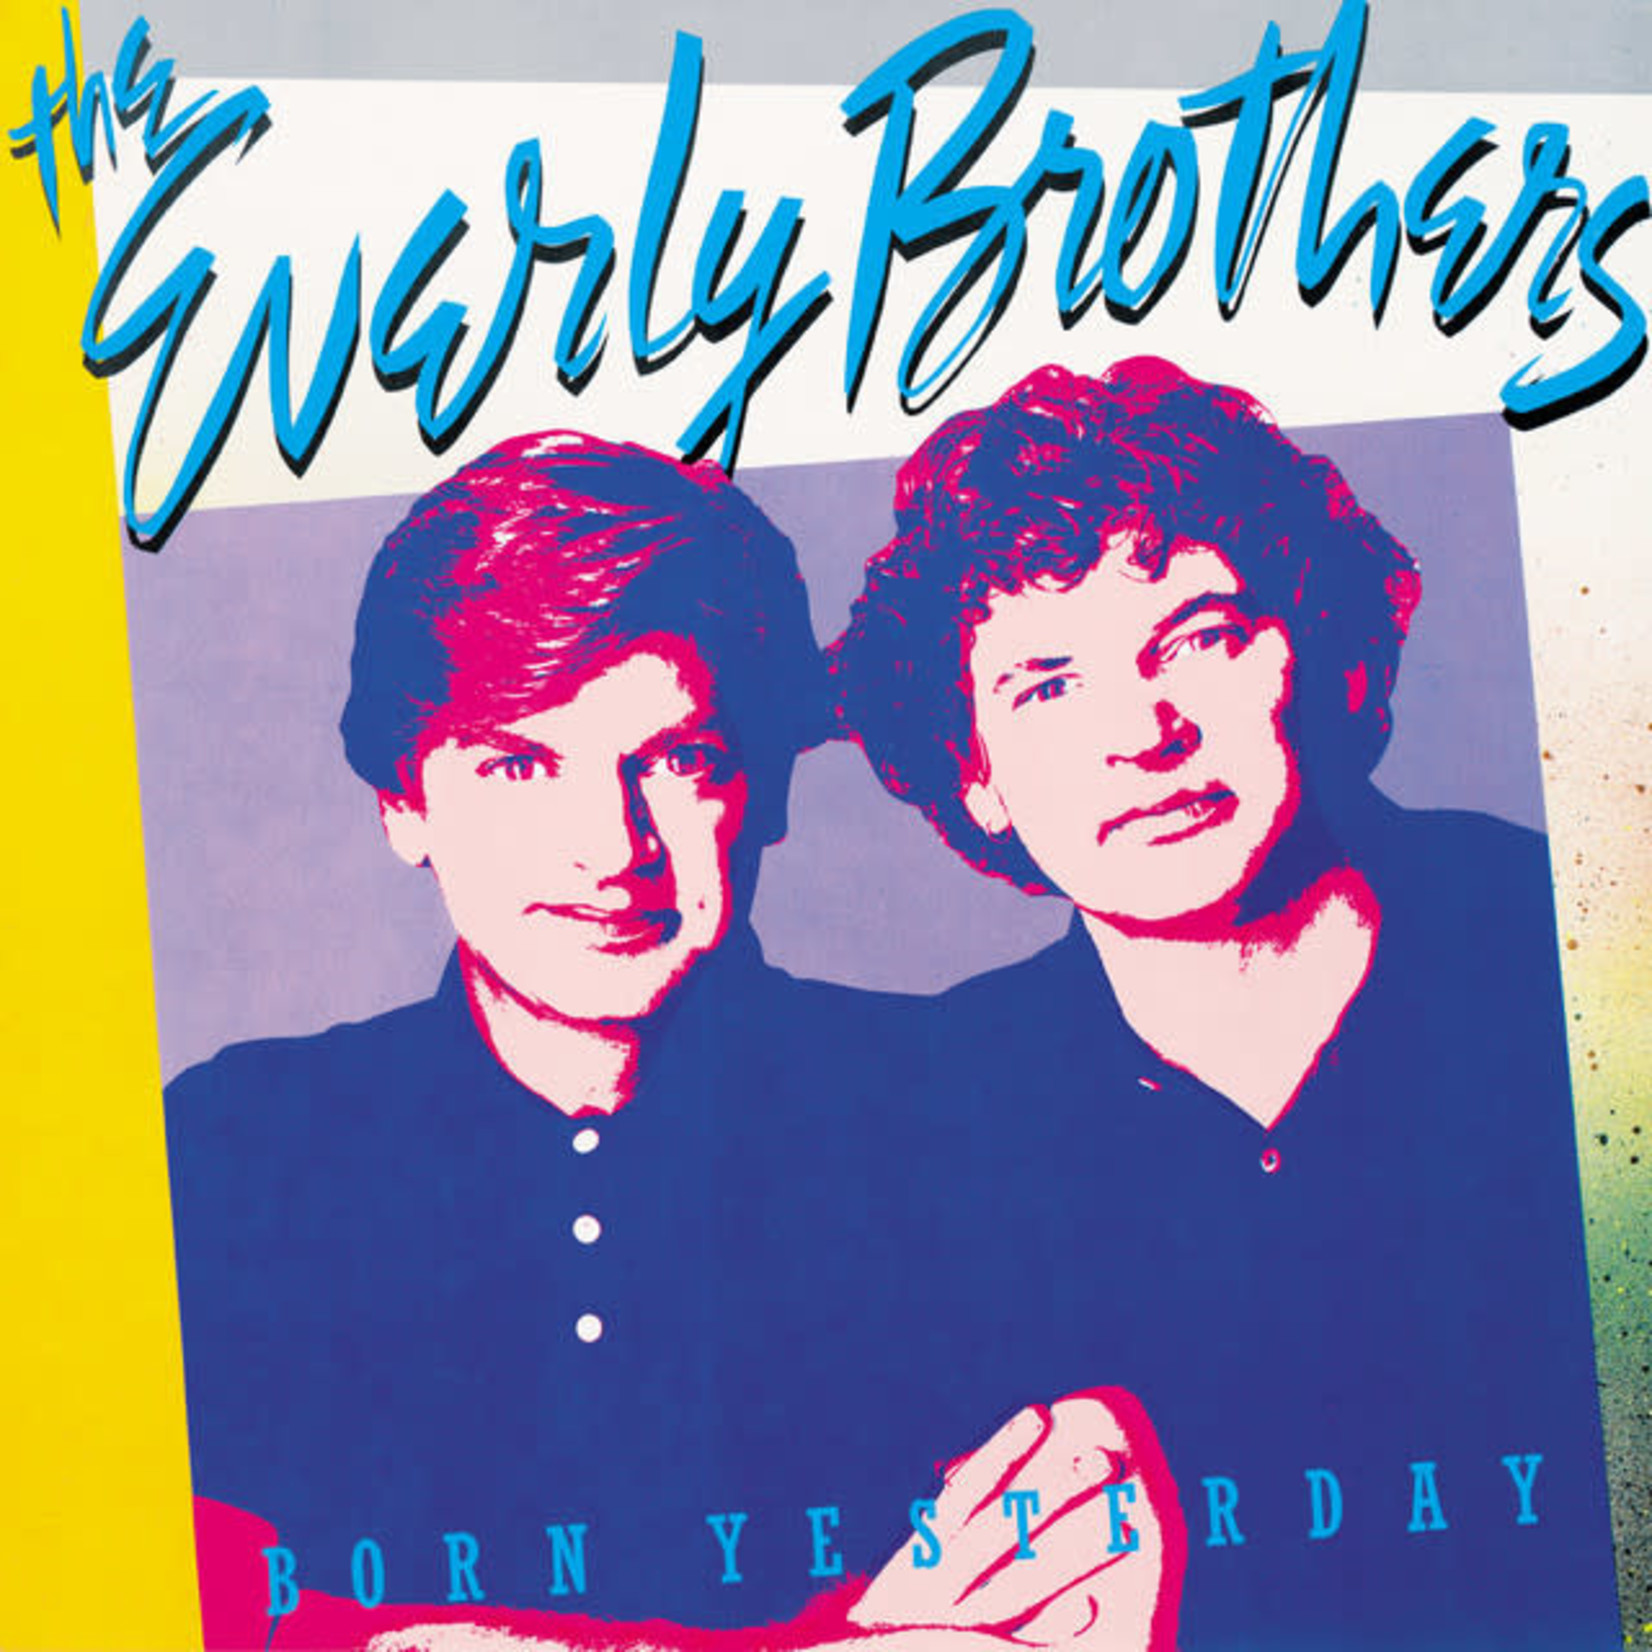 [Discontinued] Everly Brothers - Born Yesterday